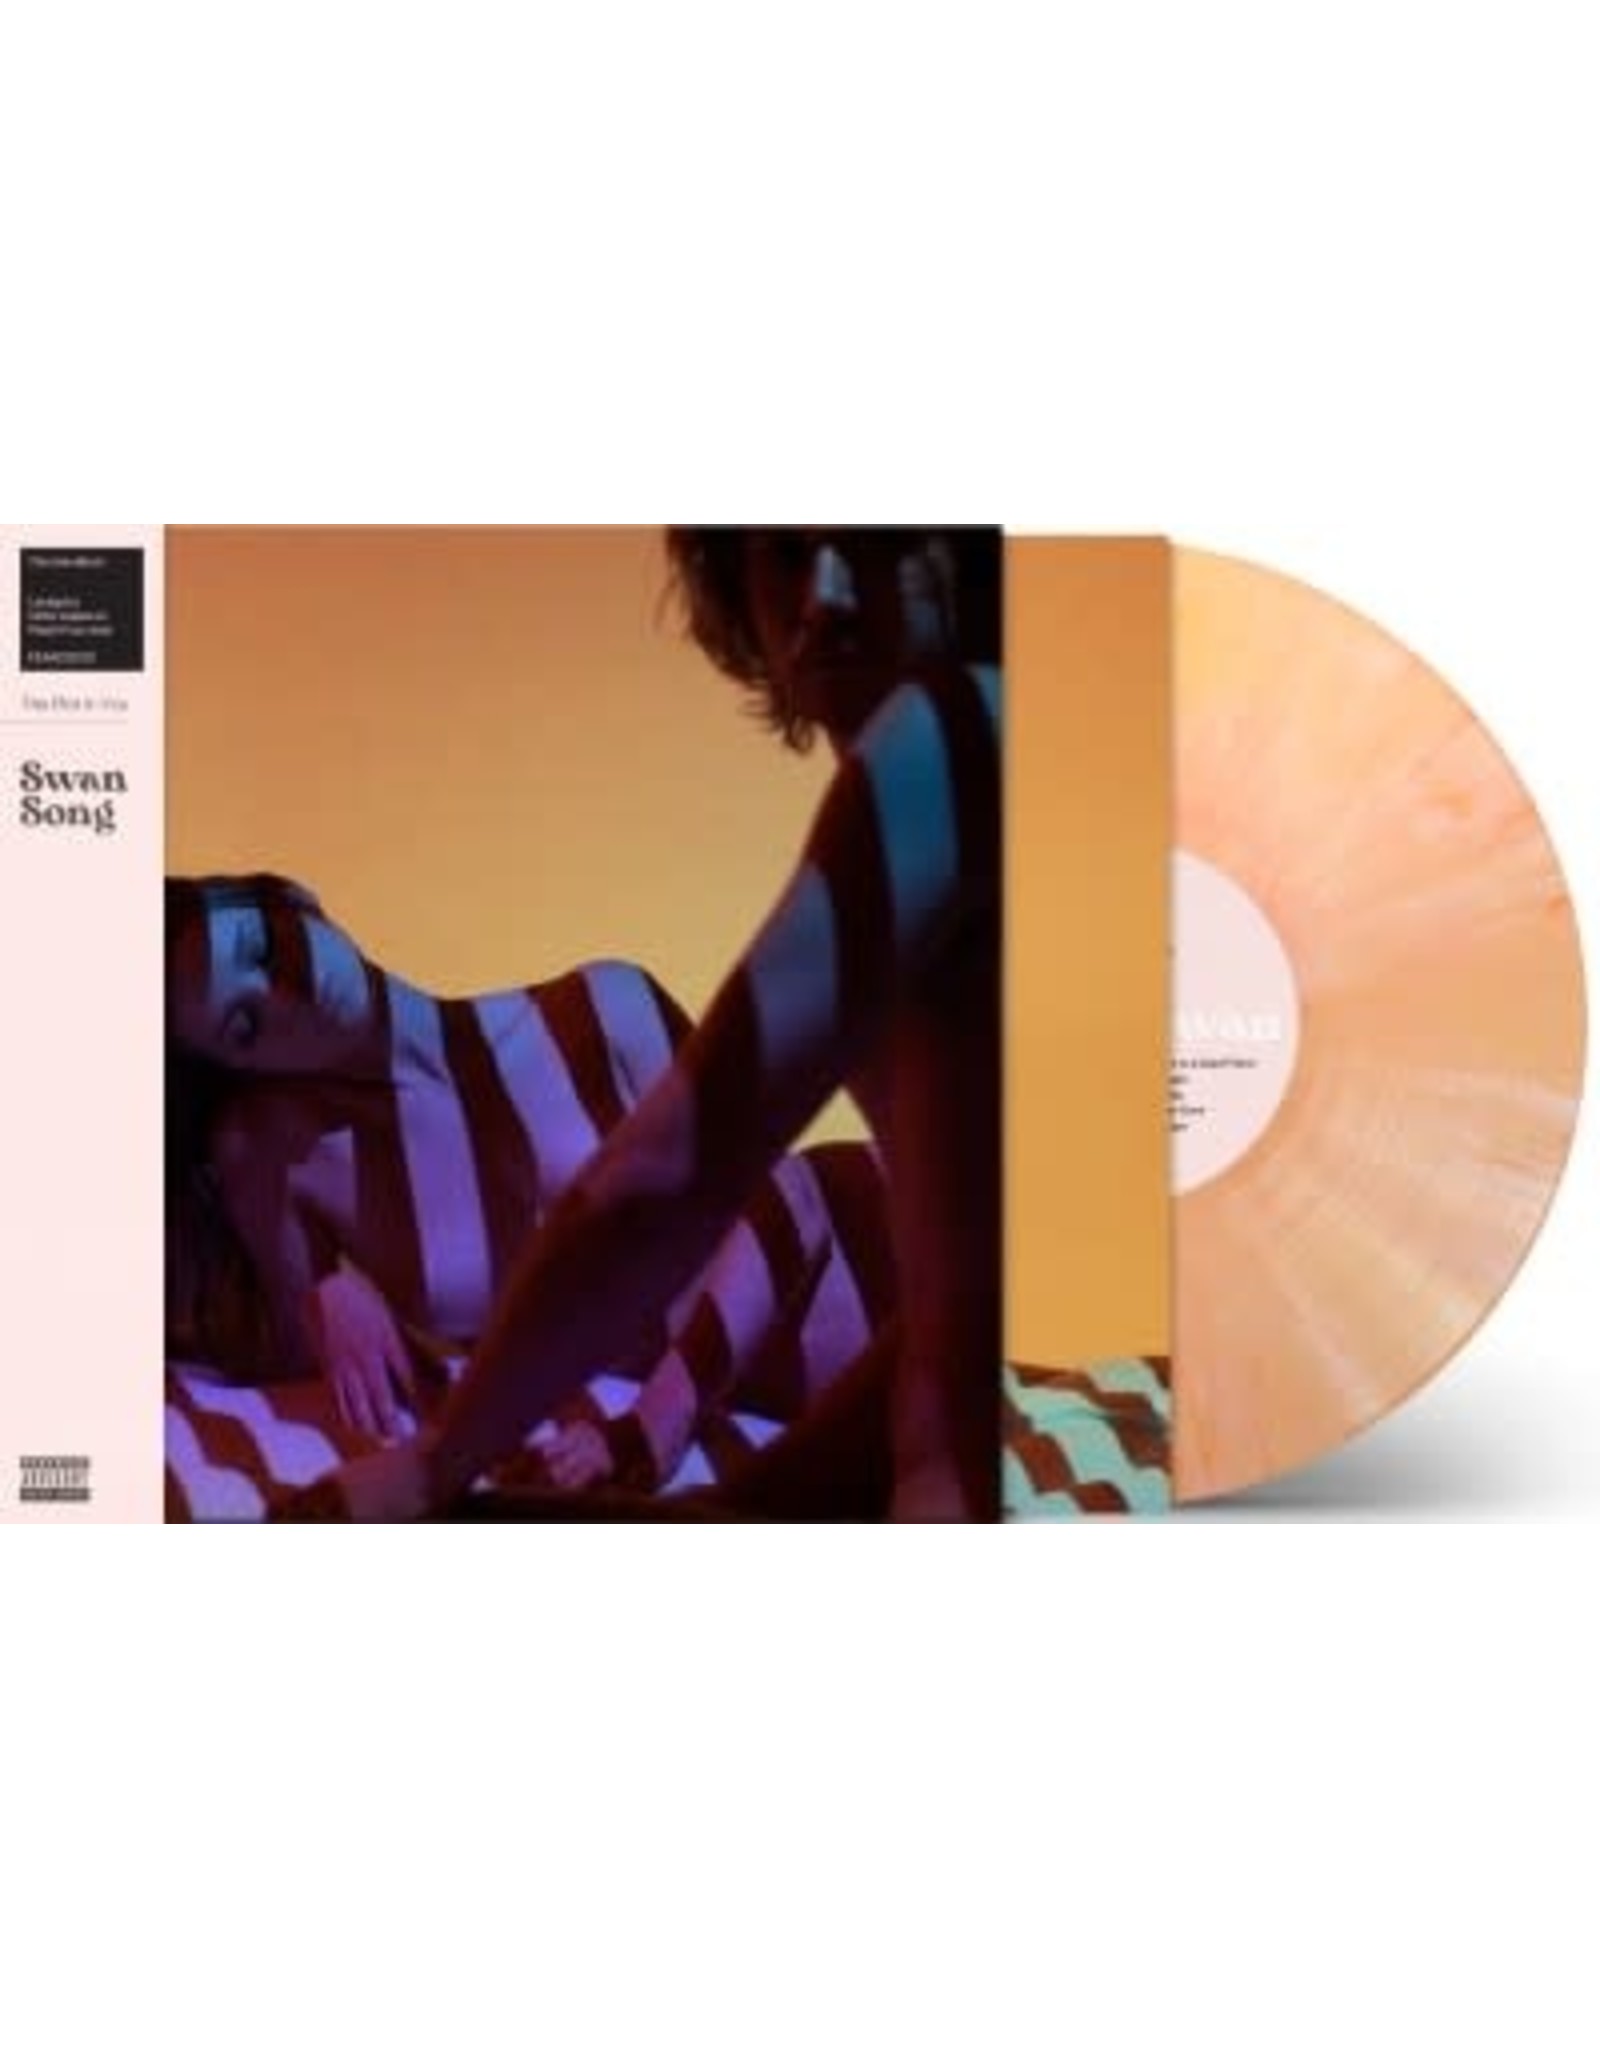 Plot In You - Swan Song LIMITED PEACH FUZZ LP